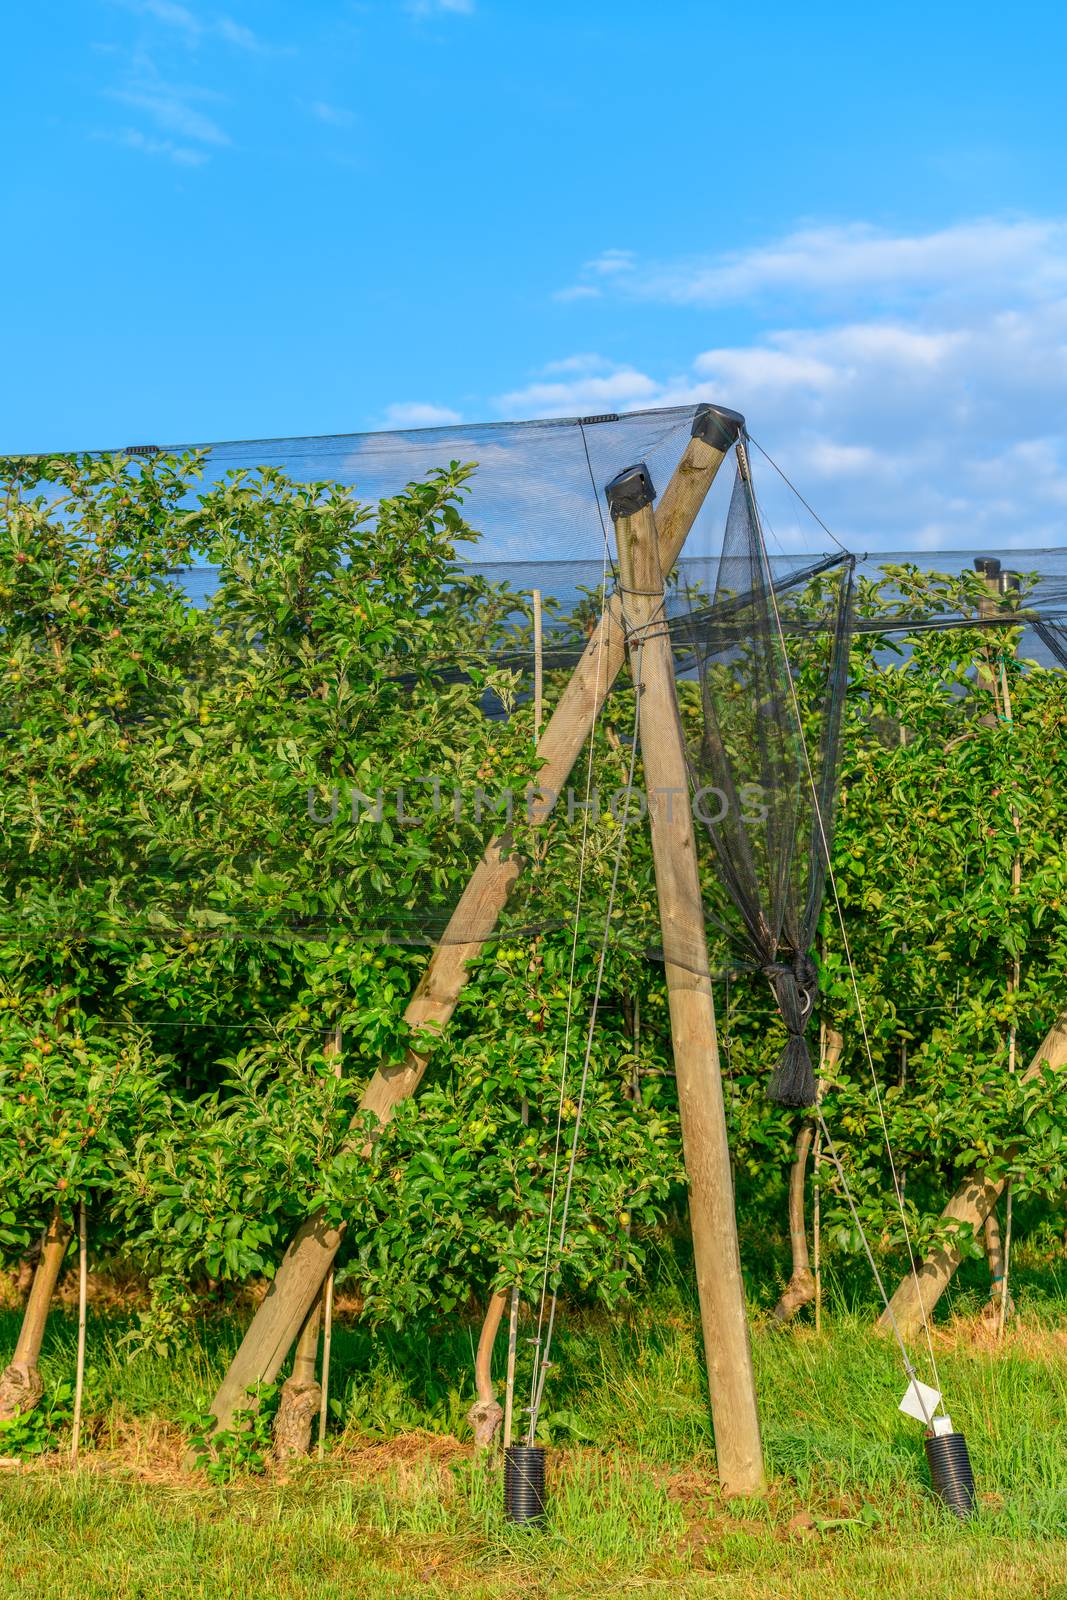 Apple orchards with Protection net against hail and elements